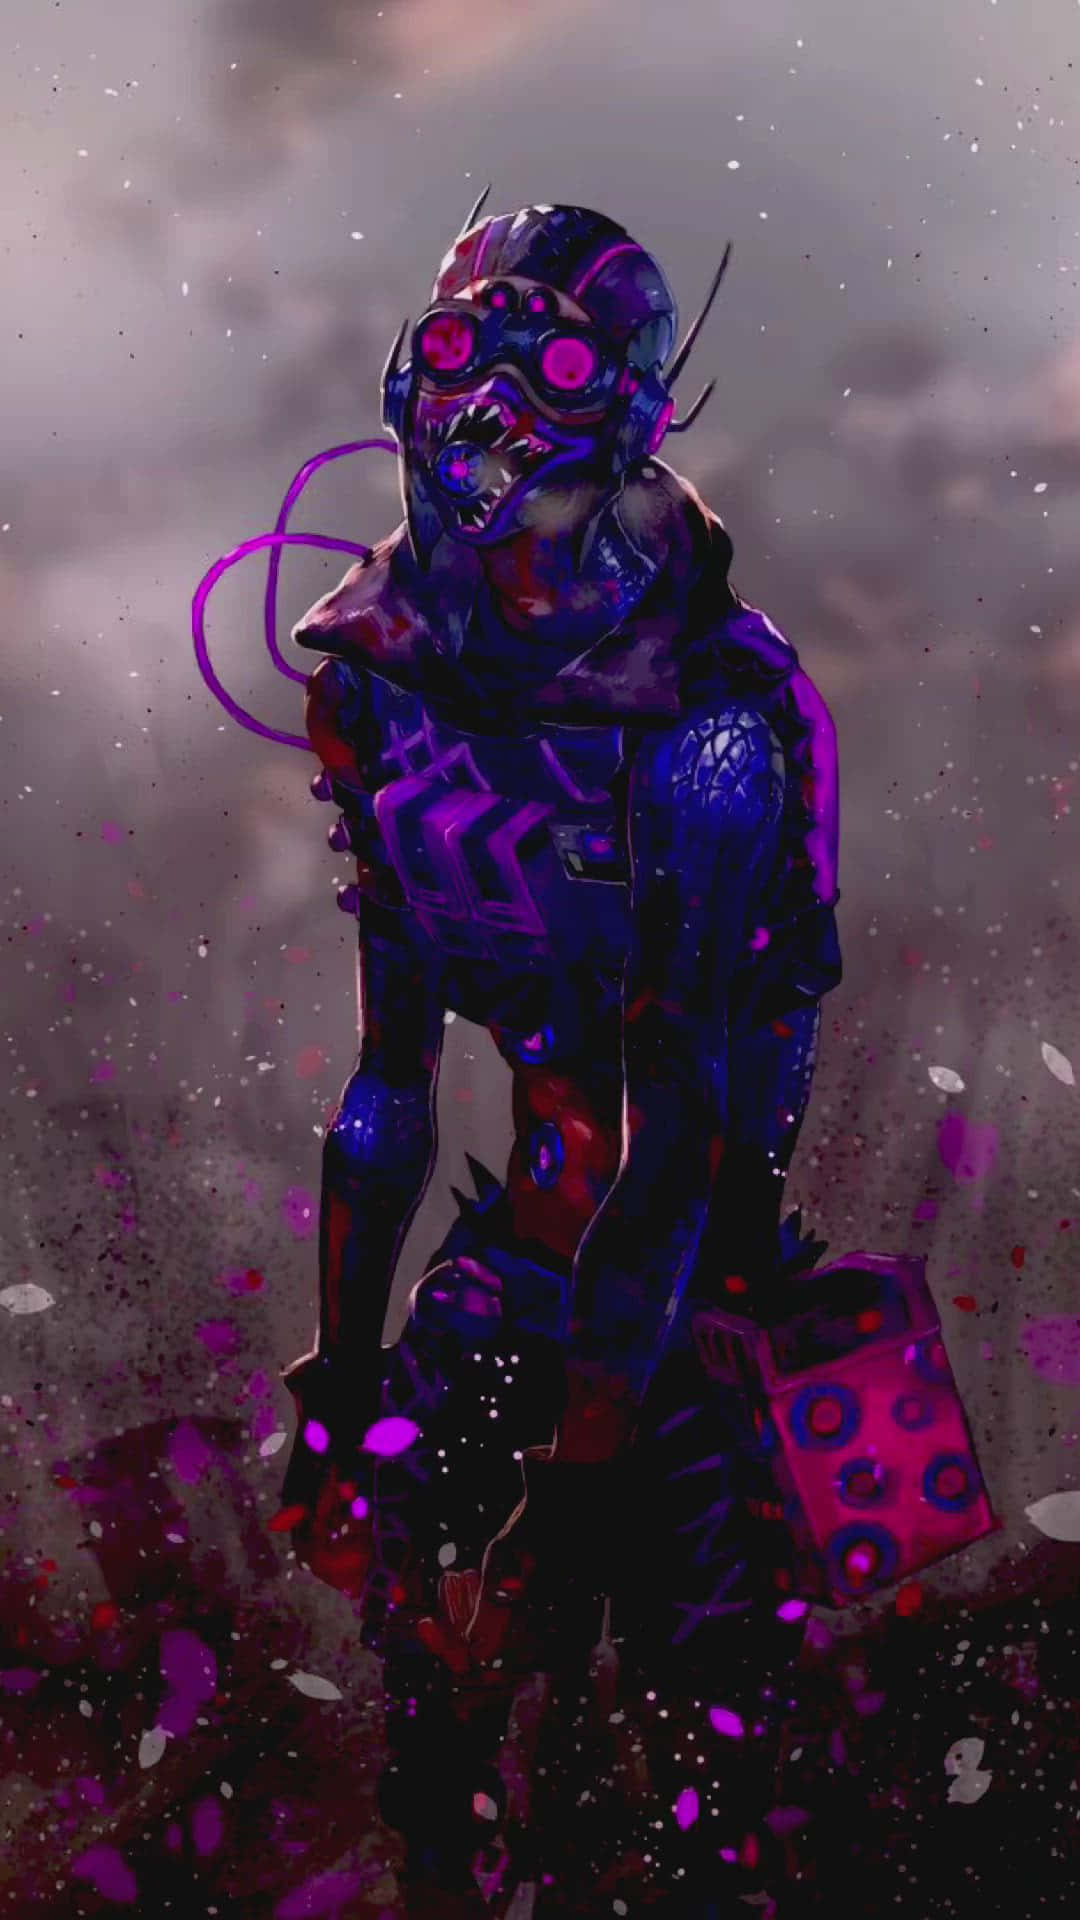 A Purple And Black Robot With A Purple Helmet Wallpaper